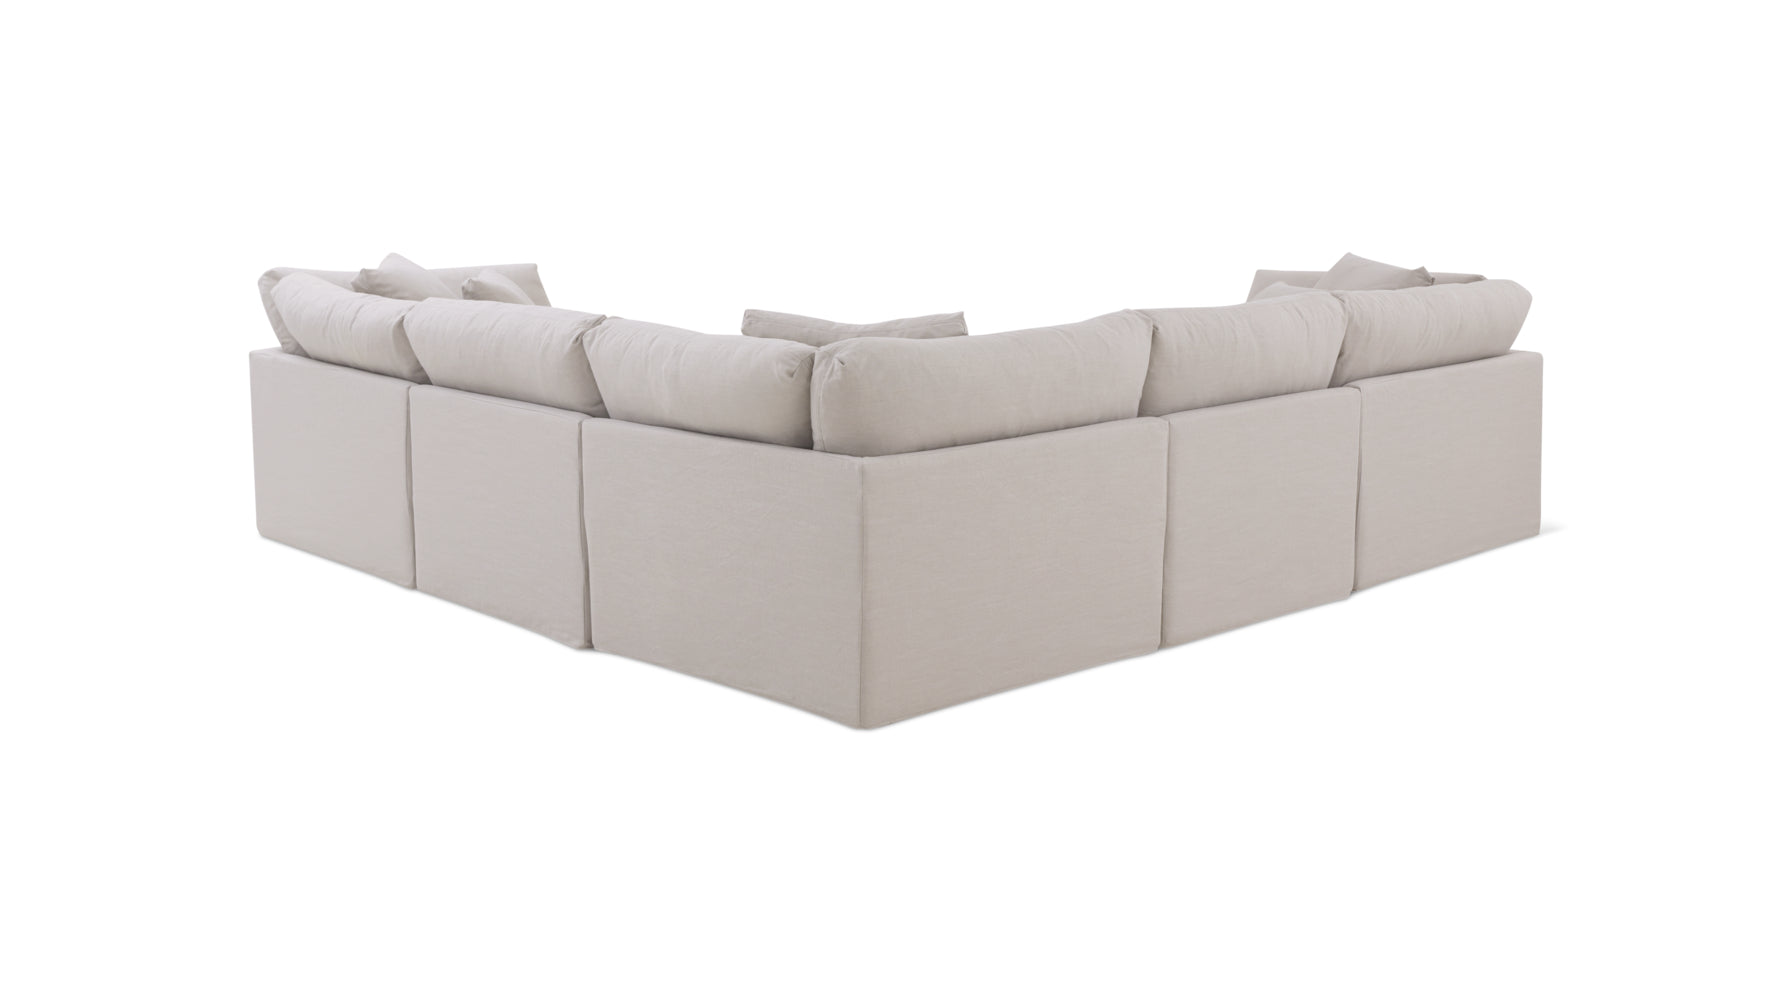 Get Together™ 5-Piece Modular Sectional Closed, Large, Clay - Image 10